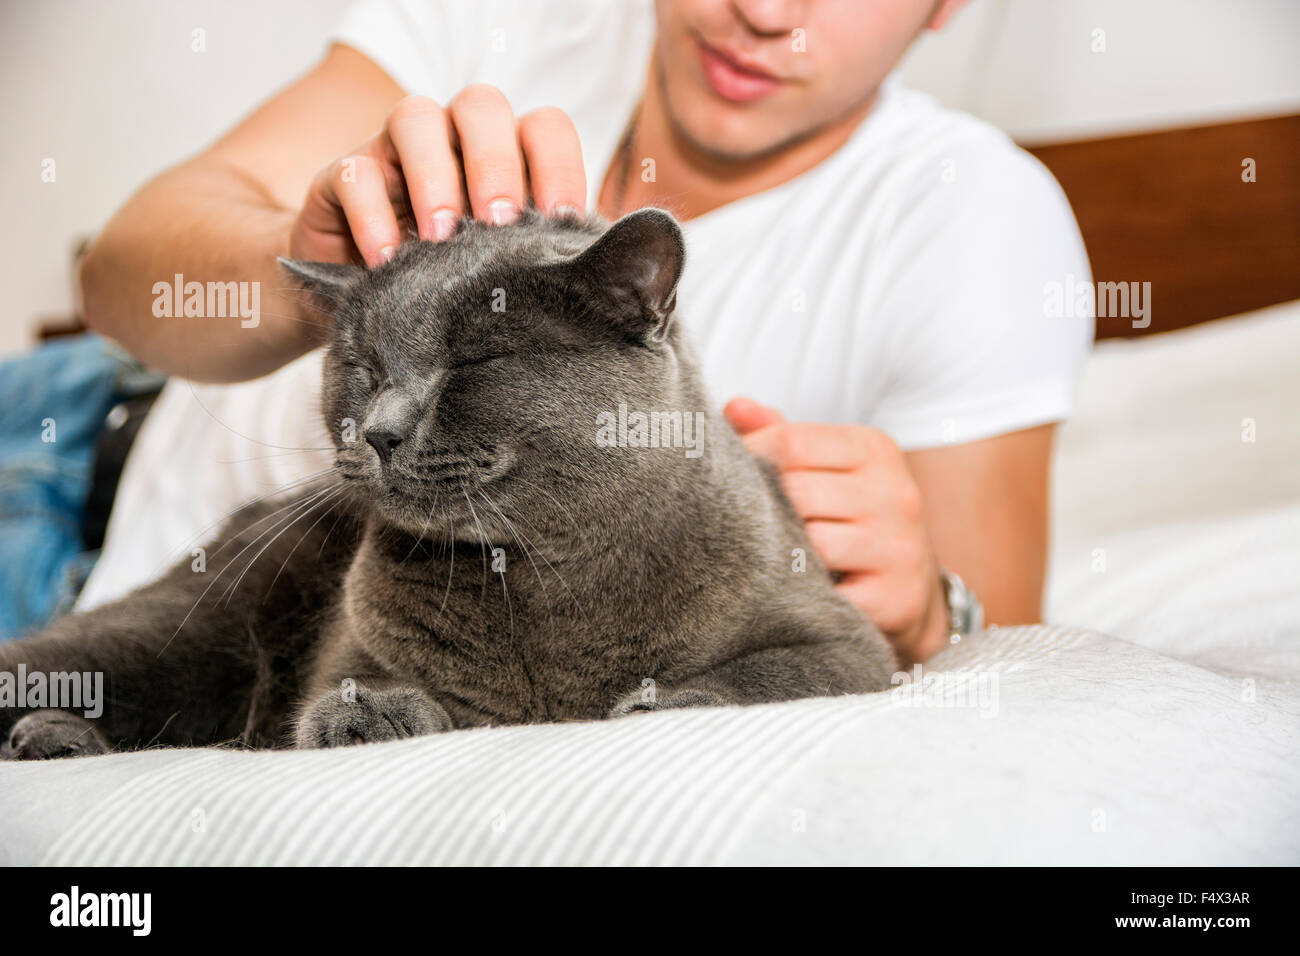 Handsome Young Animal-Lover Man on a Bed, Hugging and Cuddling his Gray Domestic Cat Pet. Stock Photo